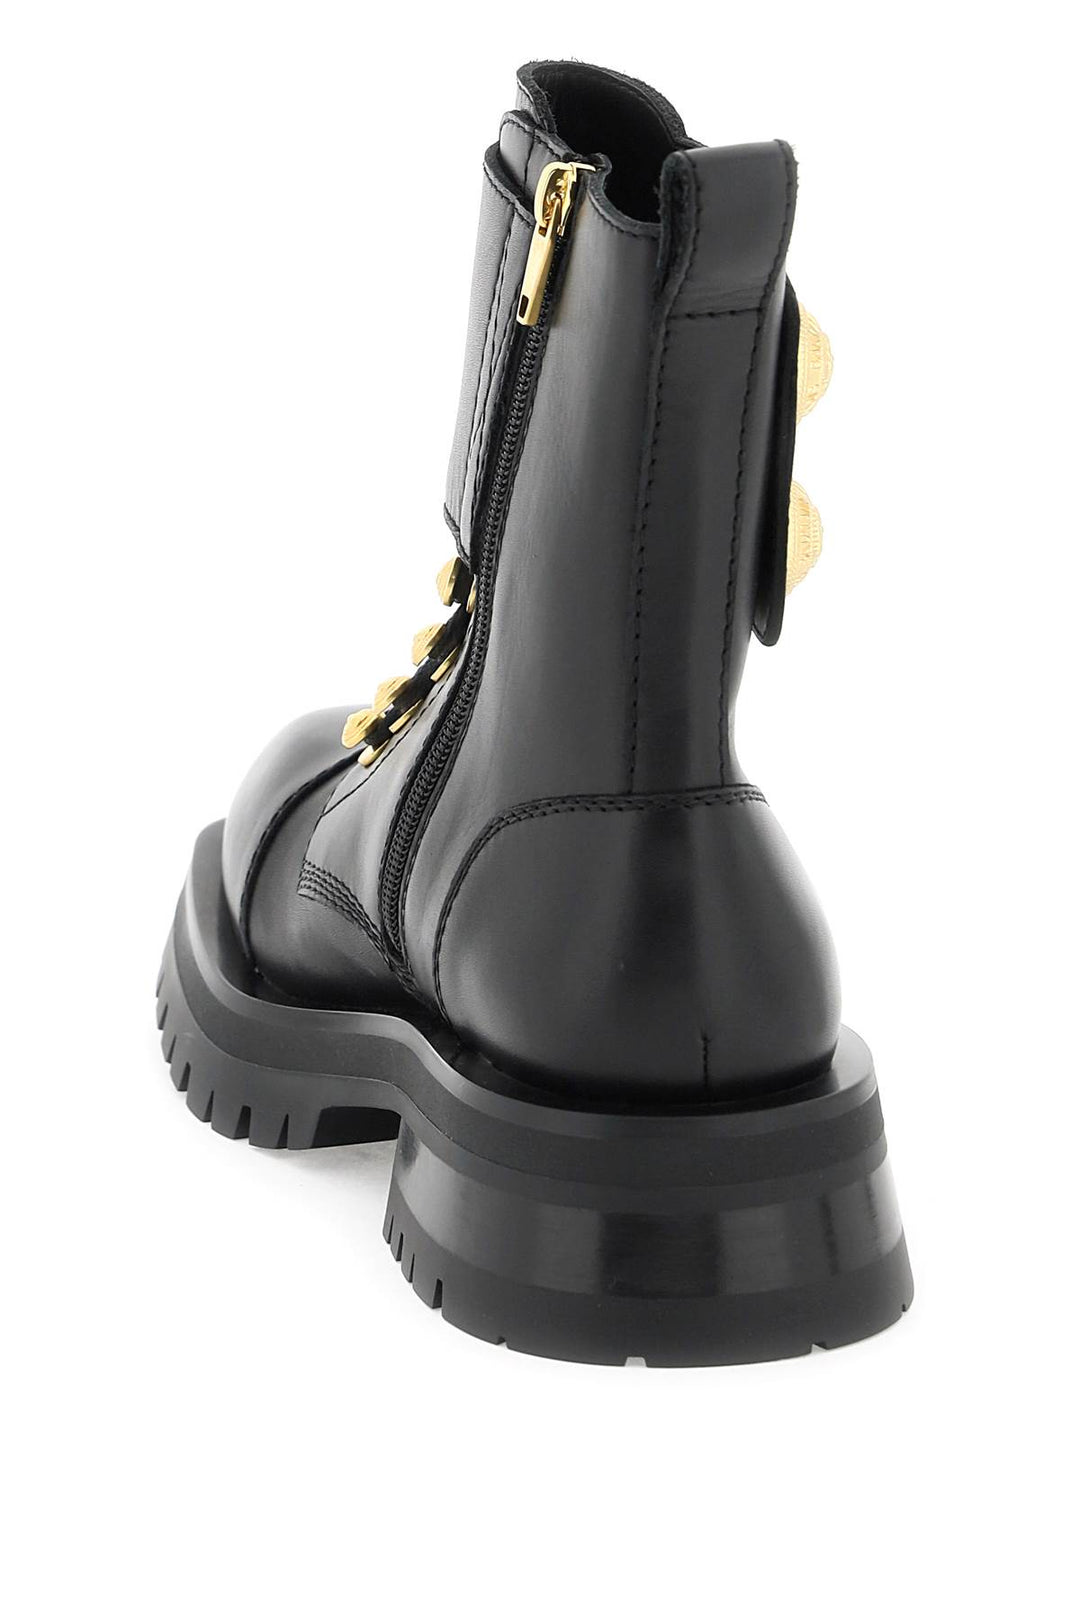 Balmain Leather Ranger Boots With Maxi Buttons   Black